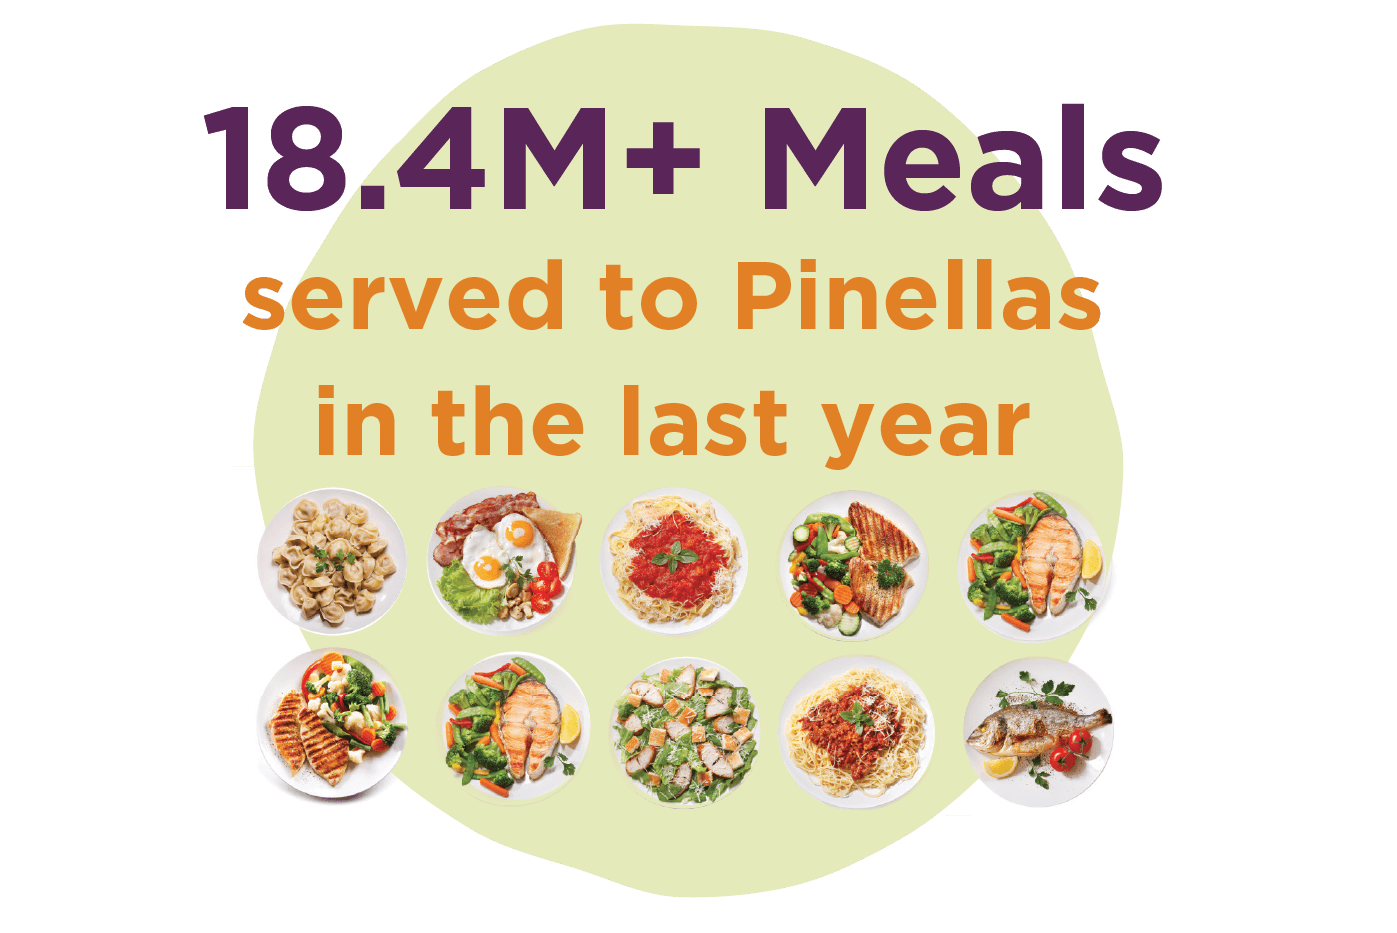 Graphic stating 18.4M+ meals served to Pinellas in the last year